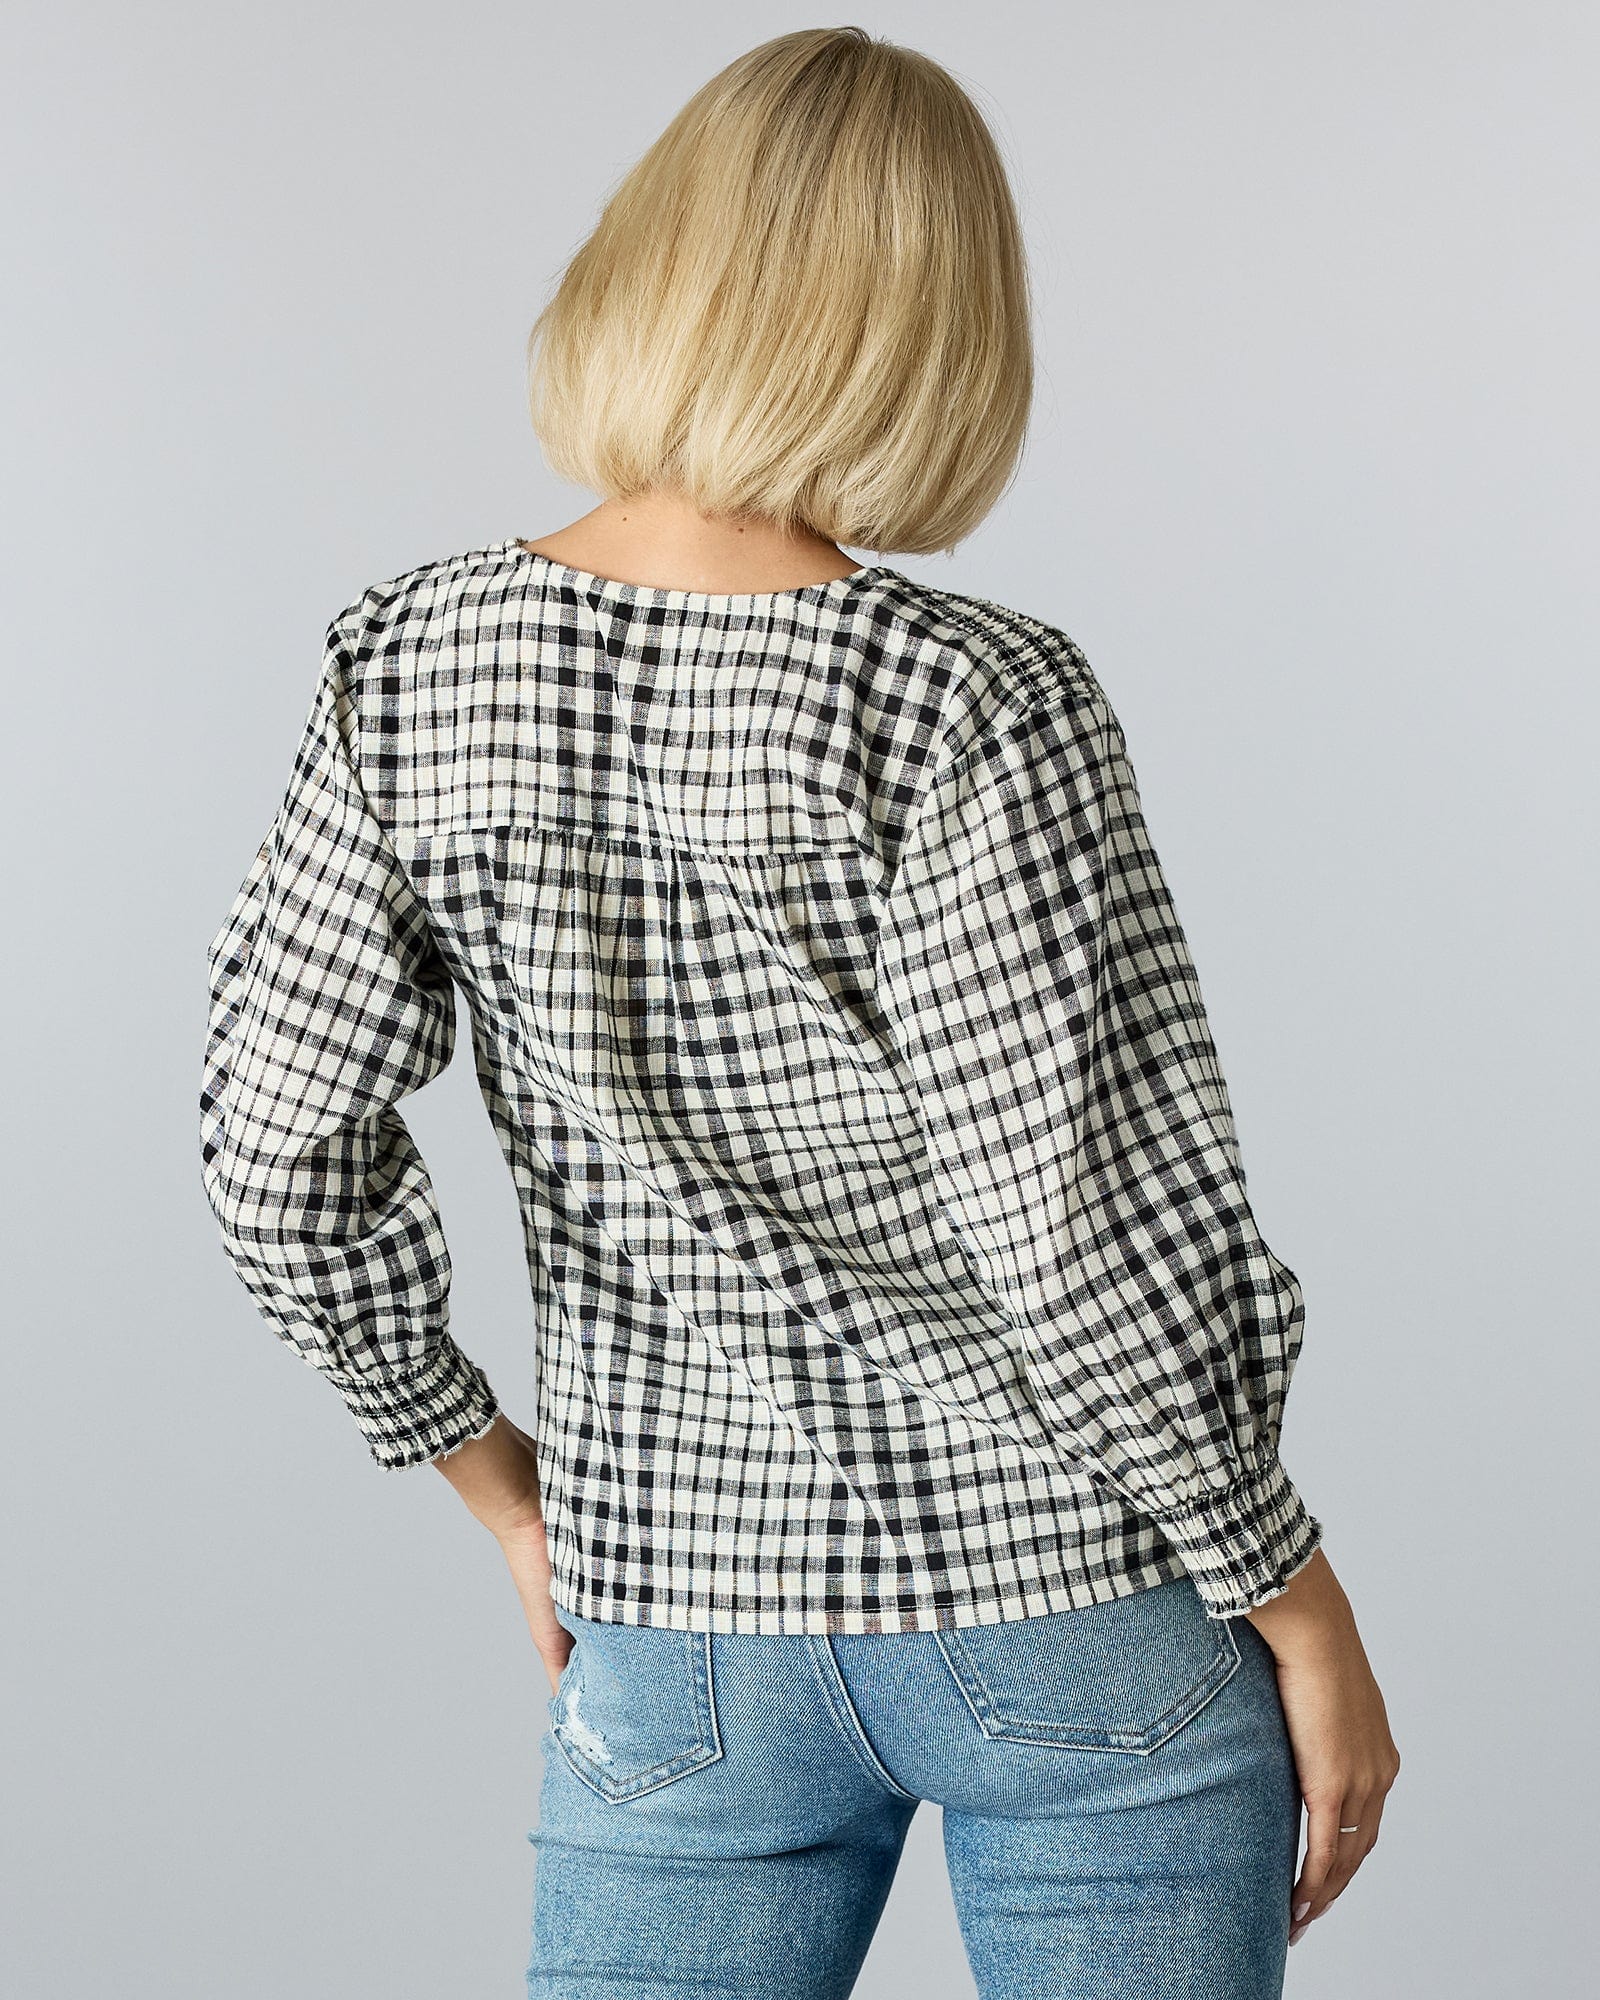 Woman in a 3/4 length v-neck blouse with plaid pattern and buttons down front.